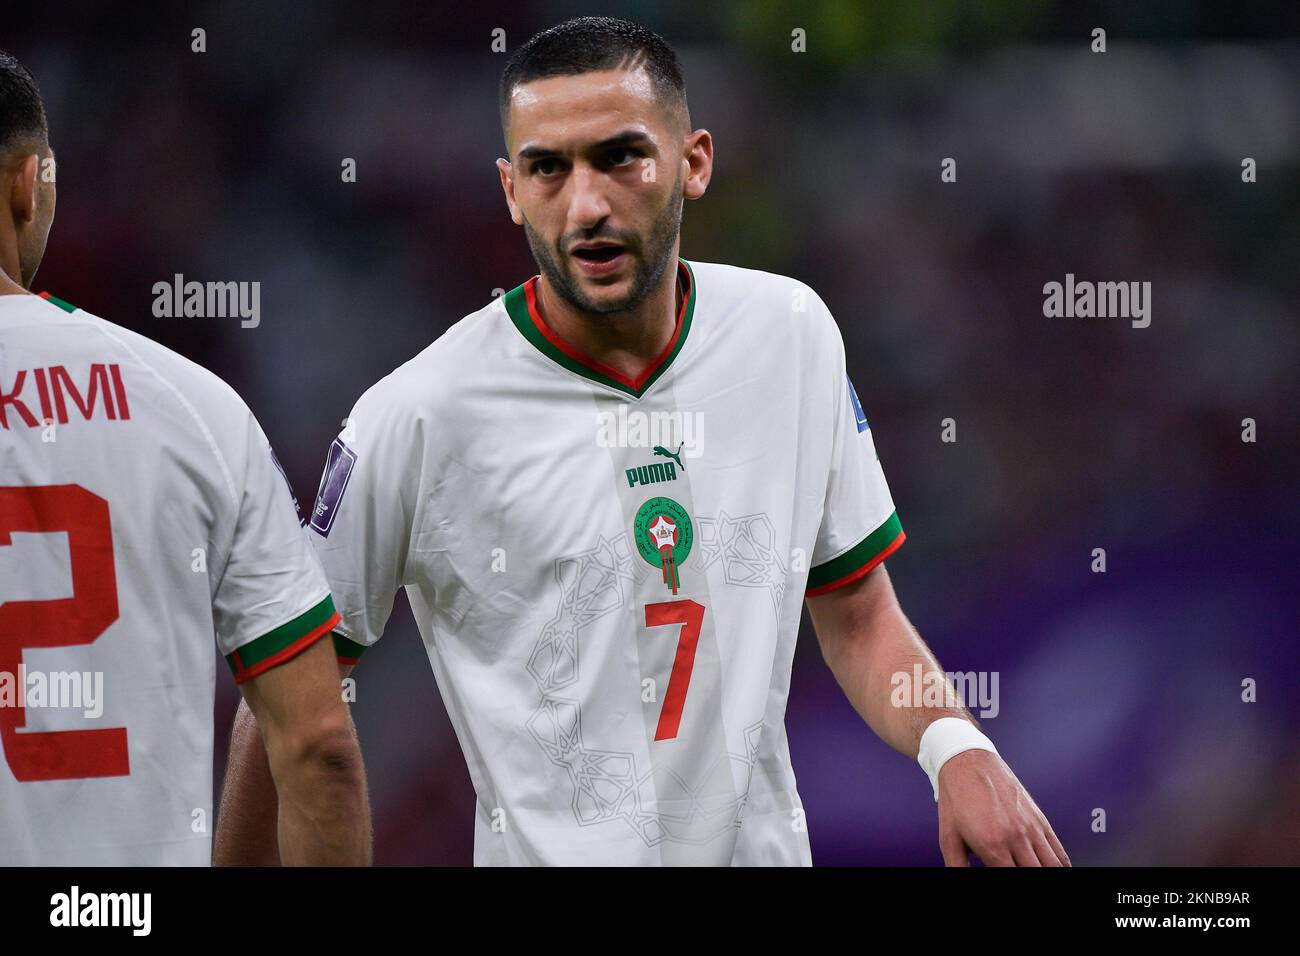 DOHA, QATAR - NOVEMBER 27: Achraf Hakimi of Morocco discusses with Hakim Ziyech of Morocco during the Group F - FIFA World Cup Qatar 2022 match between Belgium and Morocco at the Al Thumama Stadium on November 27, 2022 in Doha, Qatar (Photo by Pablo Morano/BSR Agency) Stock Photo